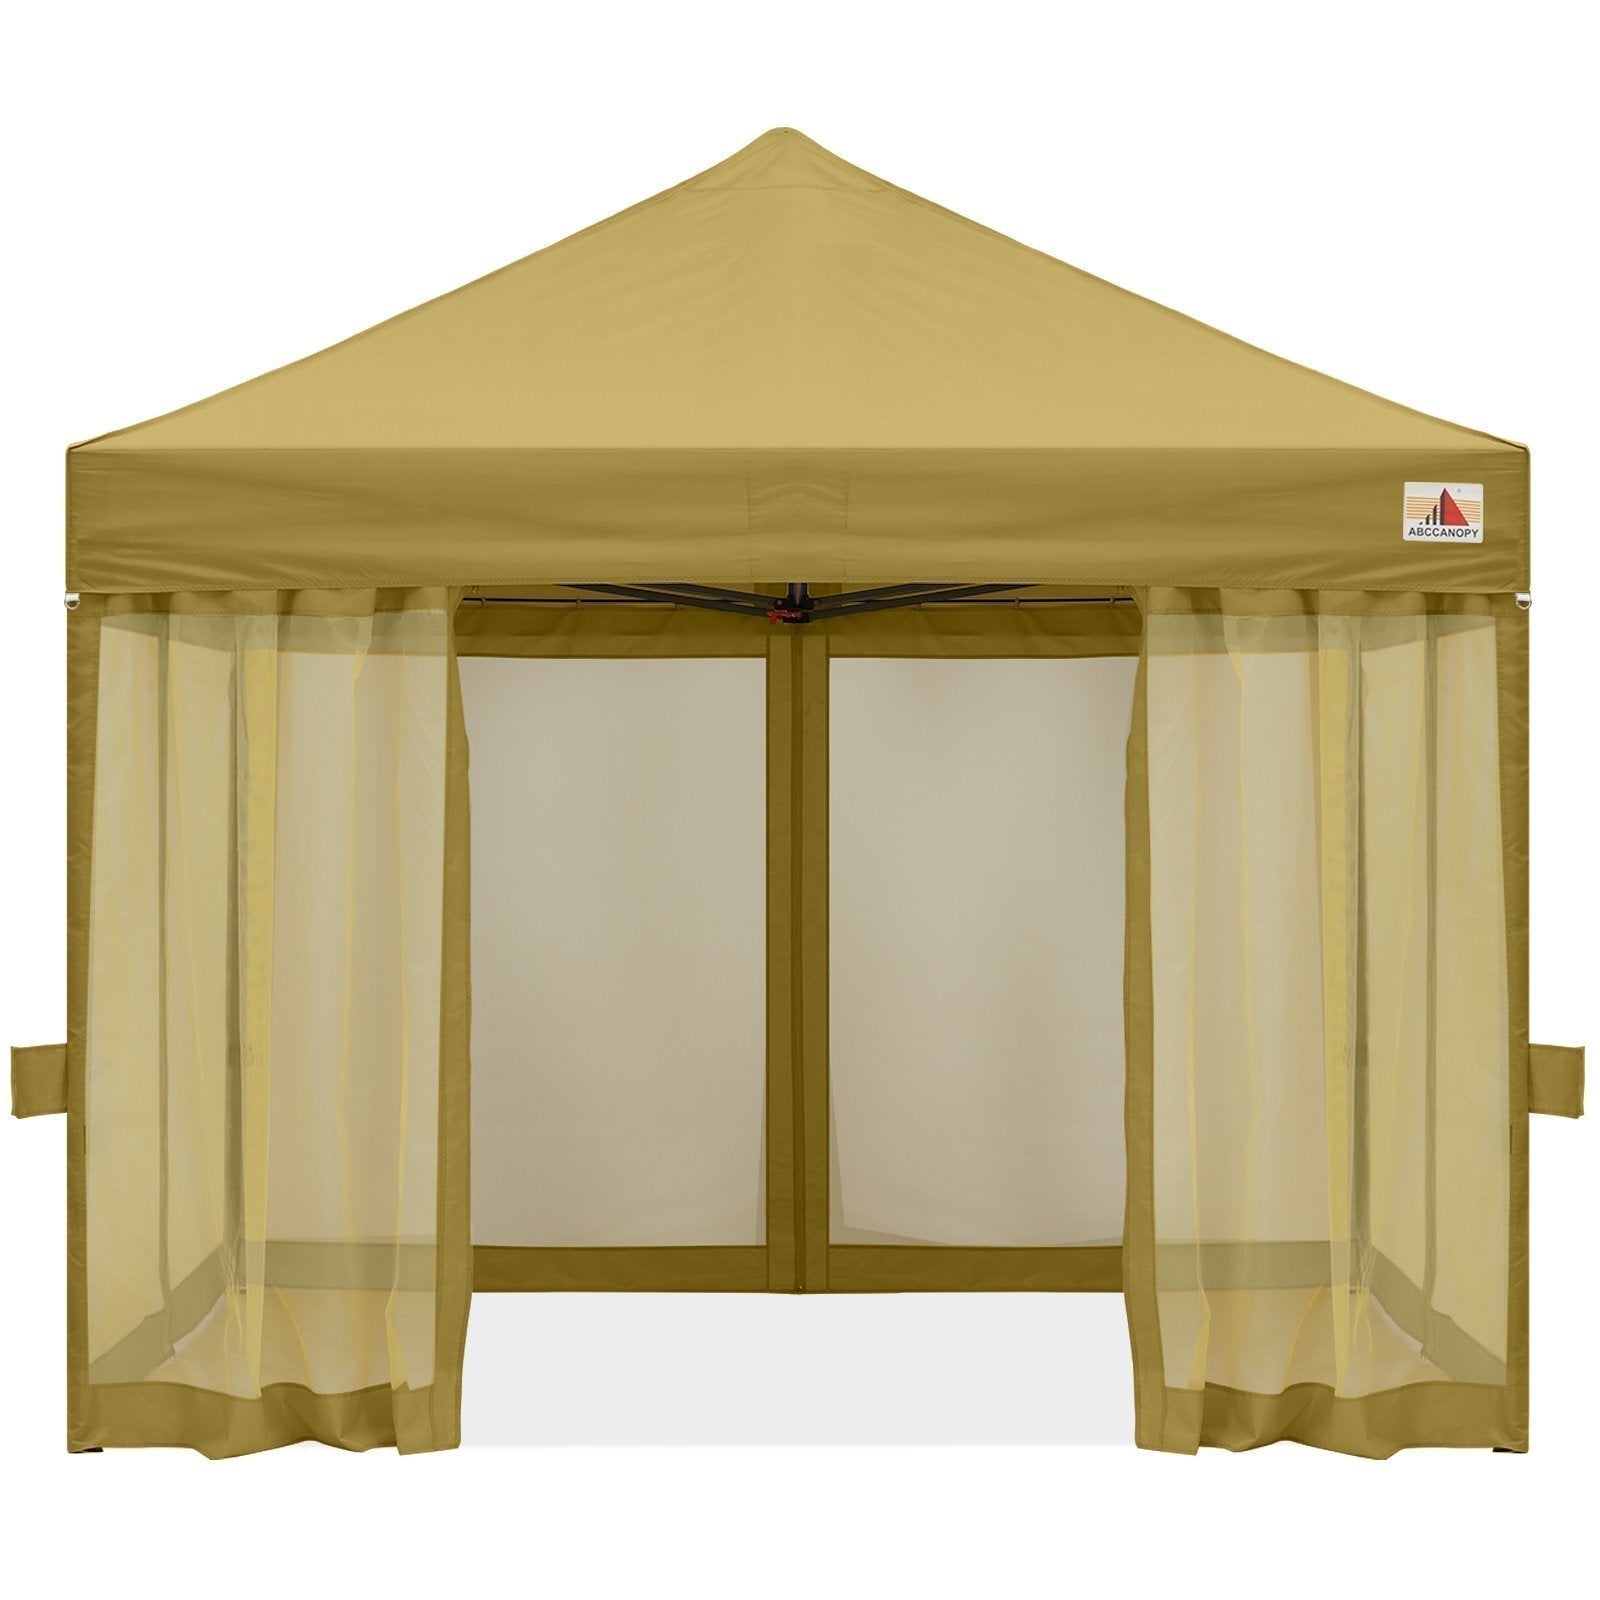 10x10 Pop Up Gazebo Canopy Tent Instant Outdoor Screen House with Netting Walls - ABC-CANOPY